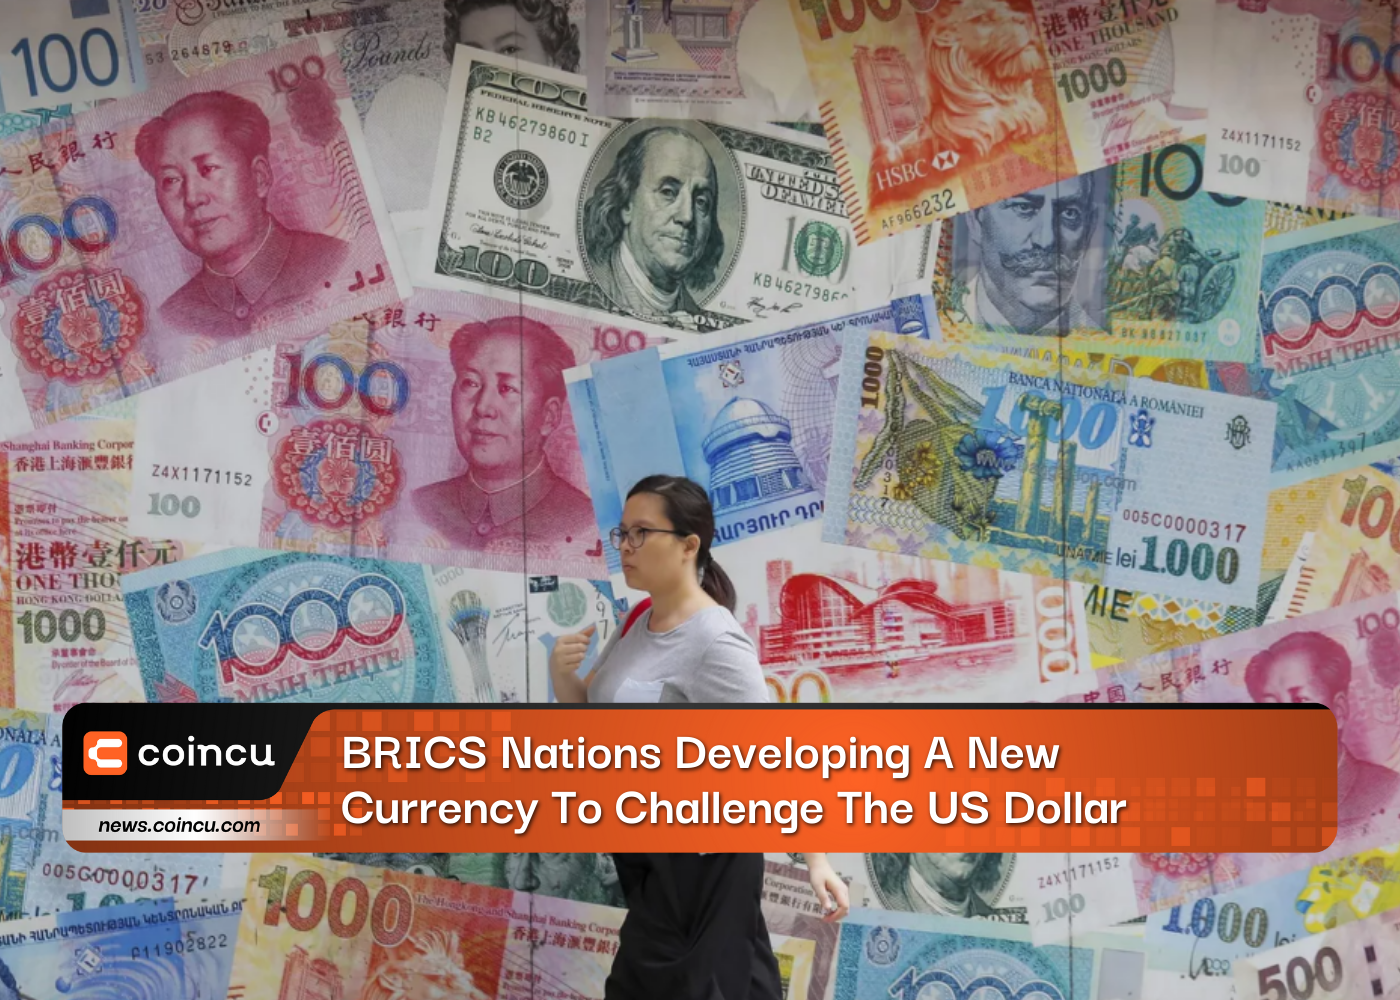 BRICS Nations Developing A New Currency To Challenge The US Dollar